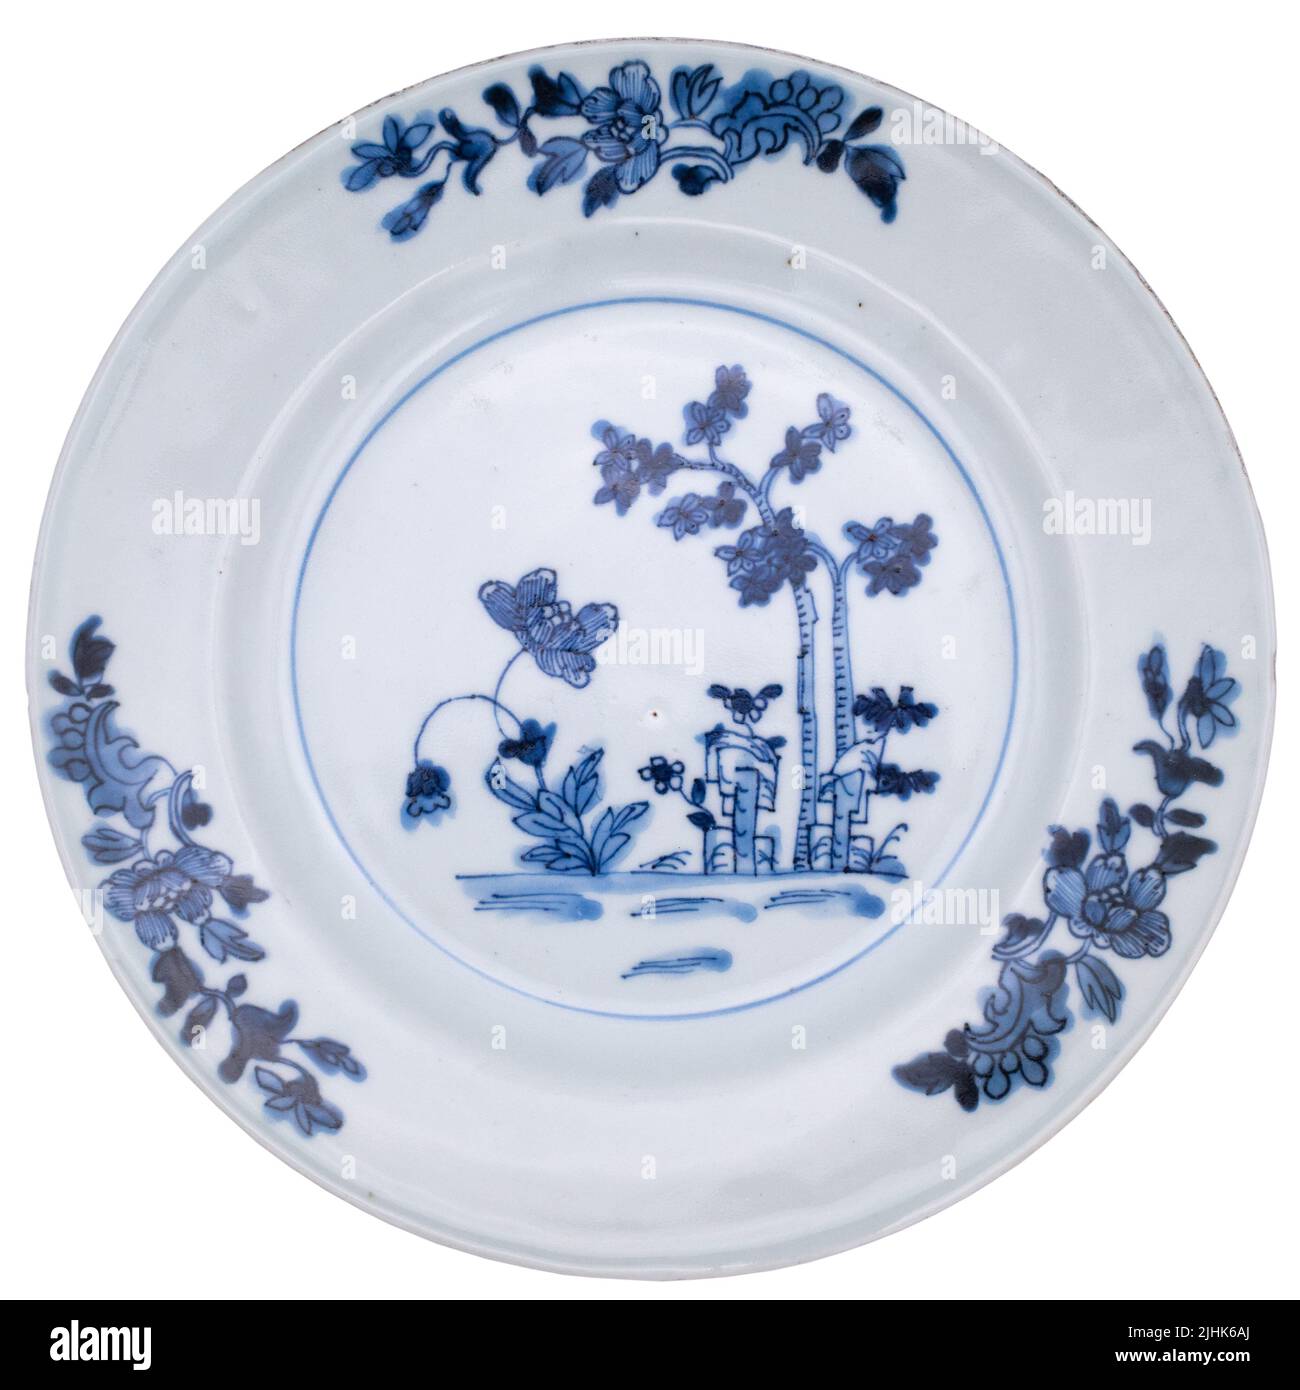 Antique Chinese Blue & White Export Porcelain Dish Plate With Floral Decoration Stock Photo